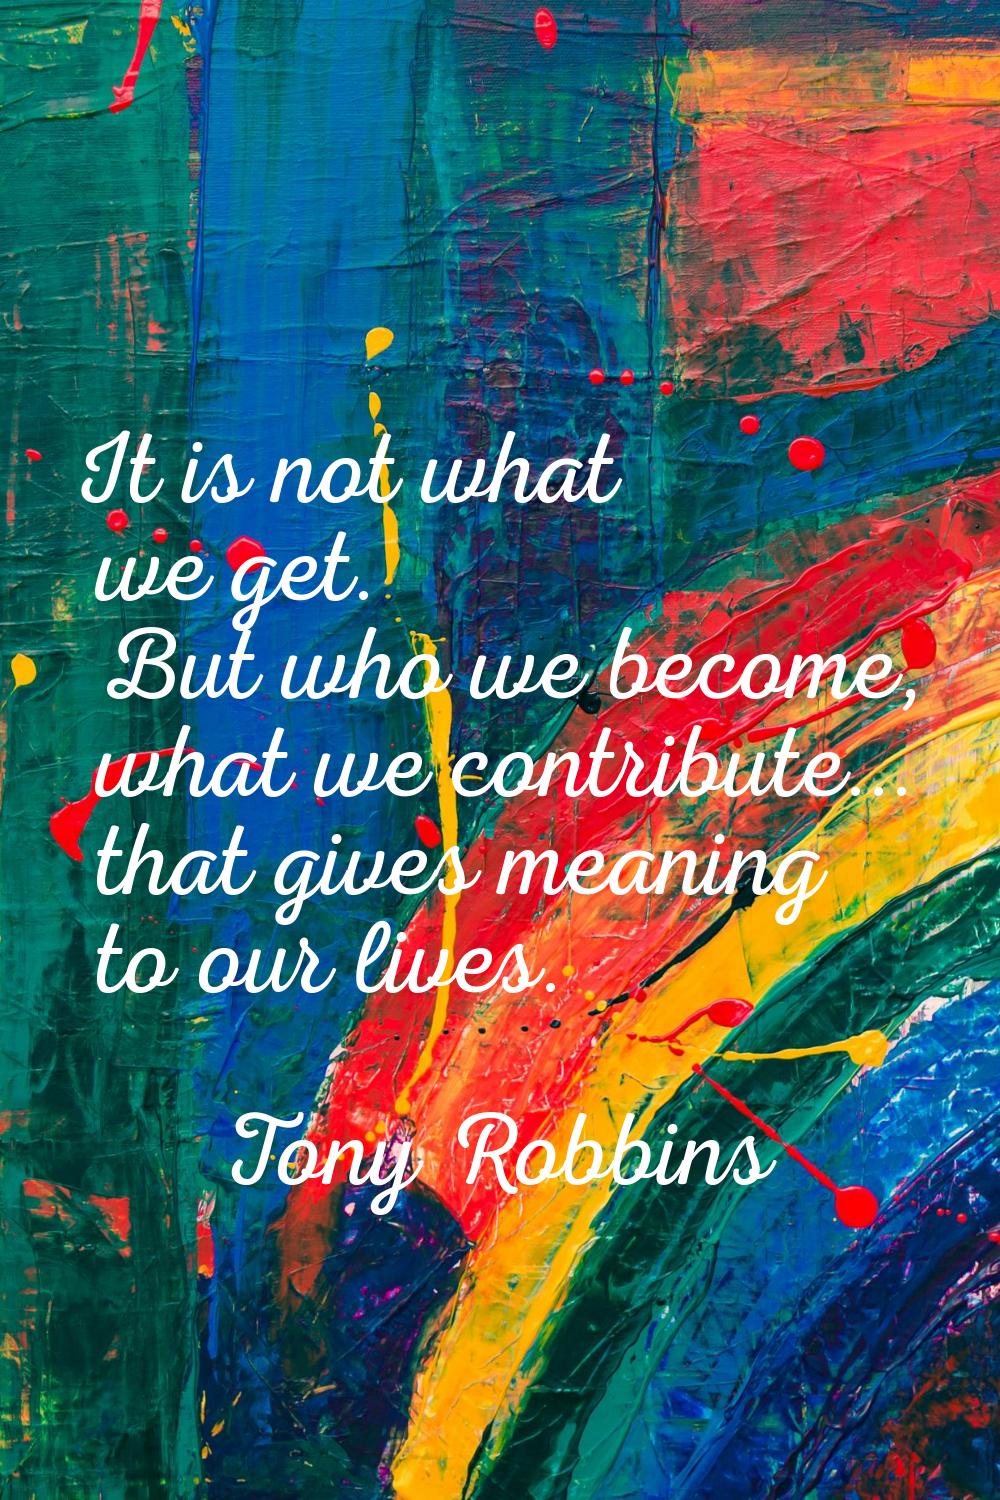 It is not what we get. But who we become, what we contribute... that gives meaning to our lives.